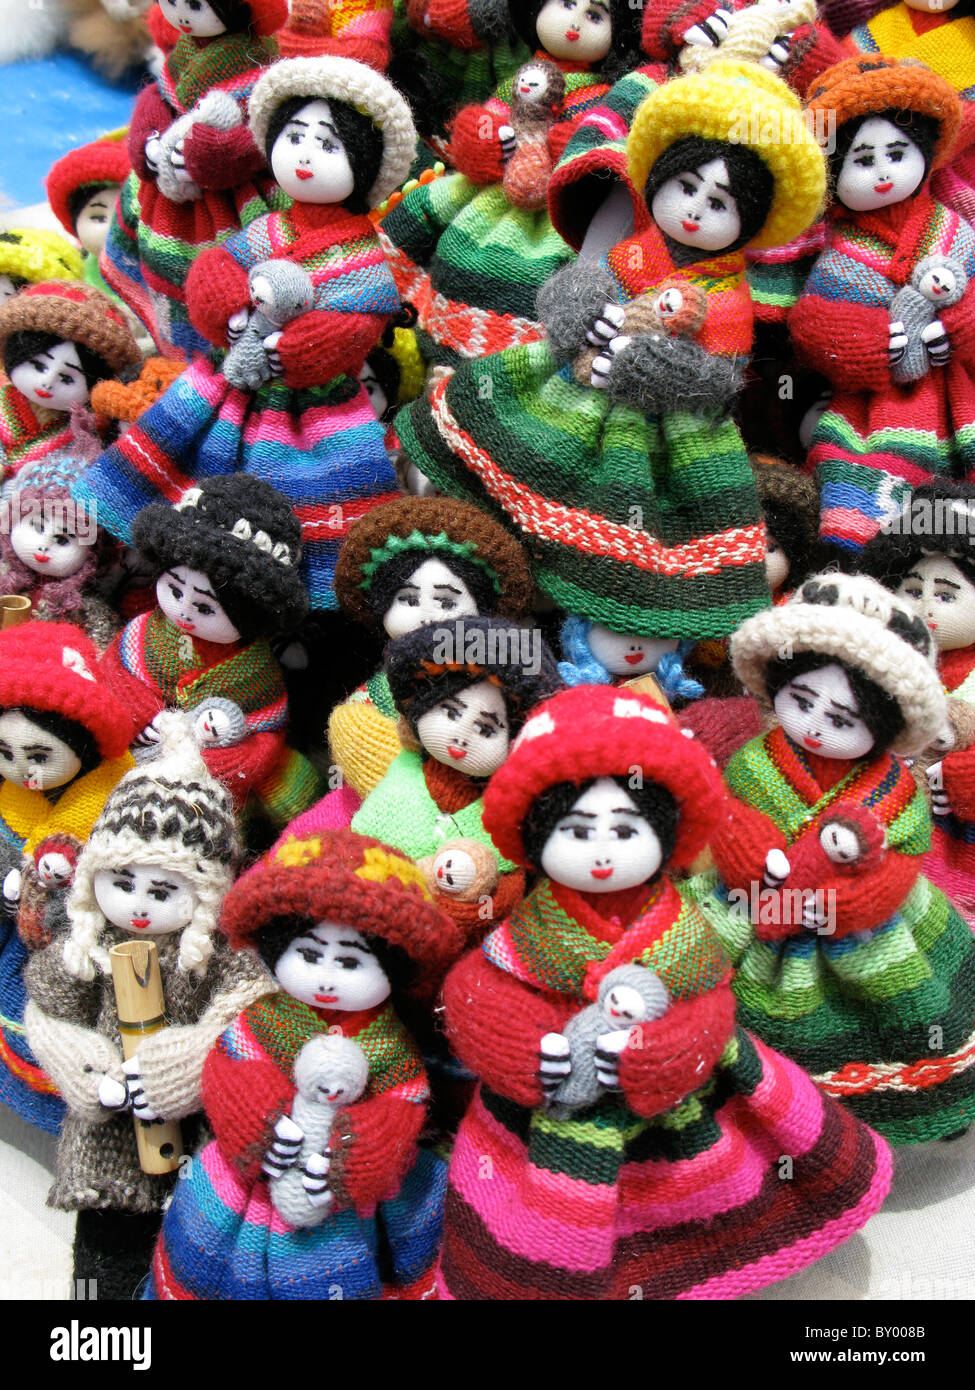 Knitted Toys In Peru Made Of Alpaca Wool Stock Photo Alamy - images of roblox toys in peru